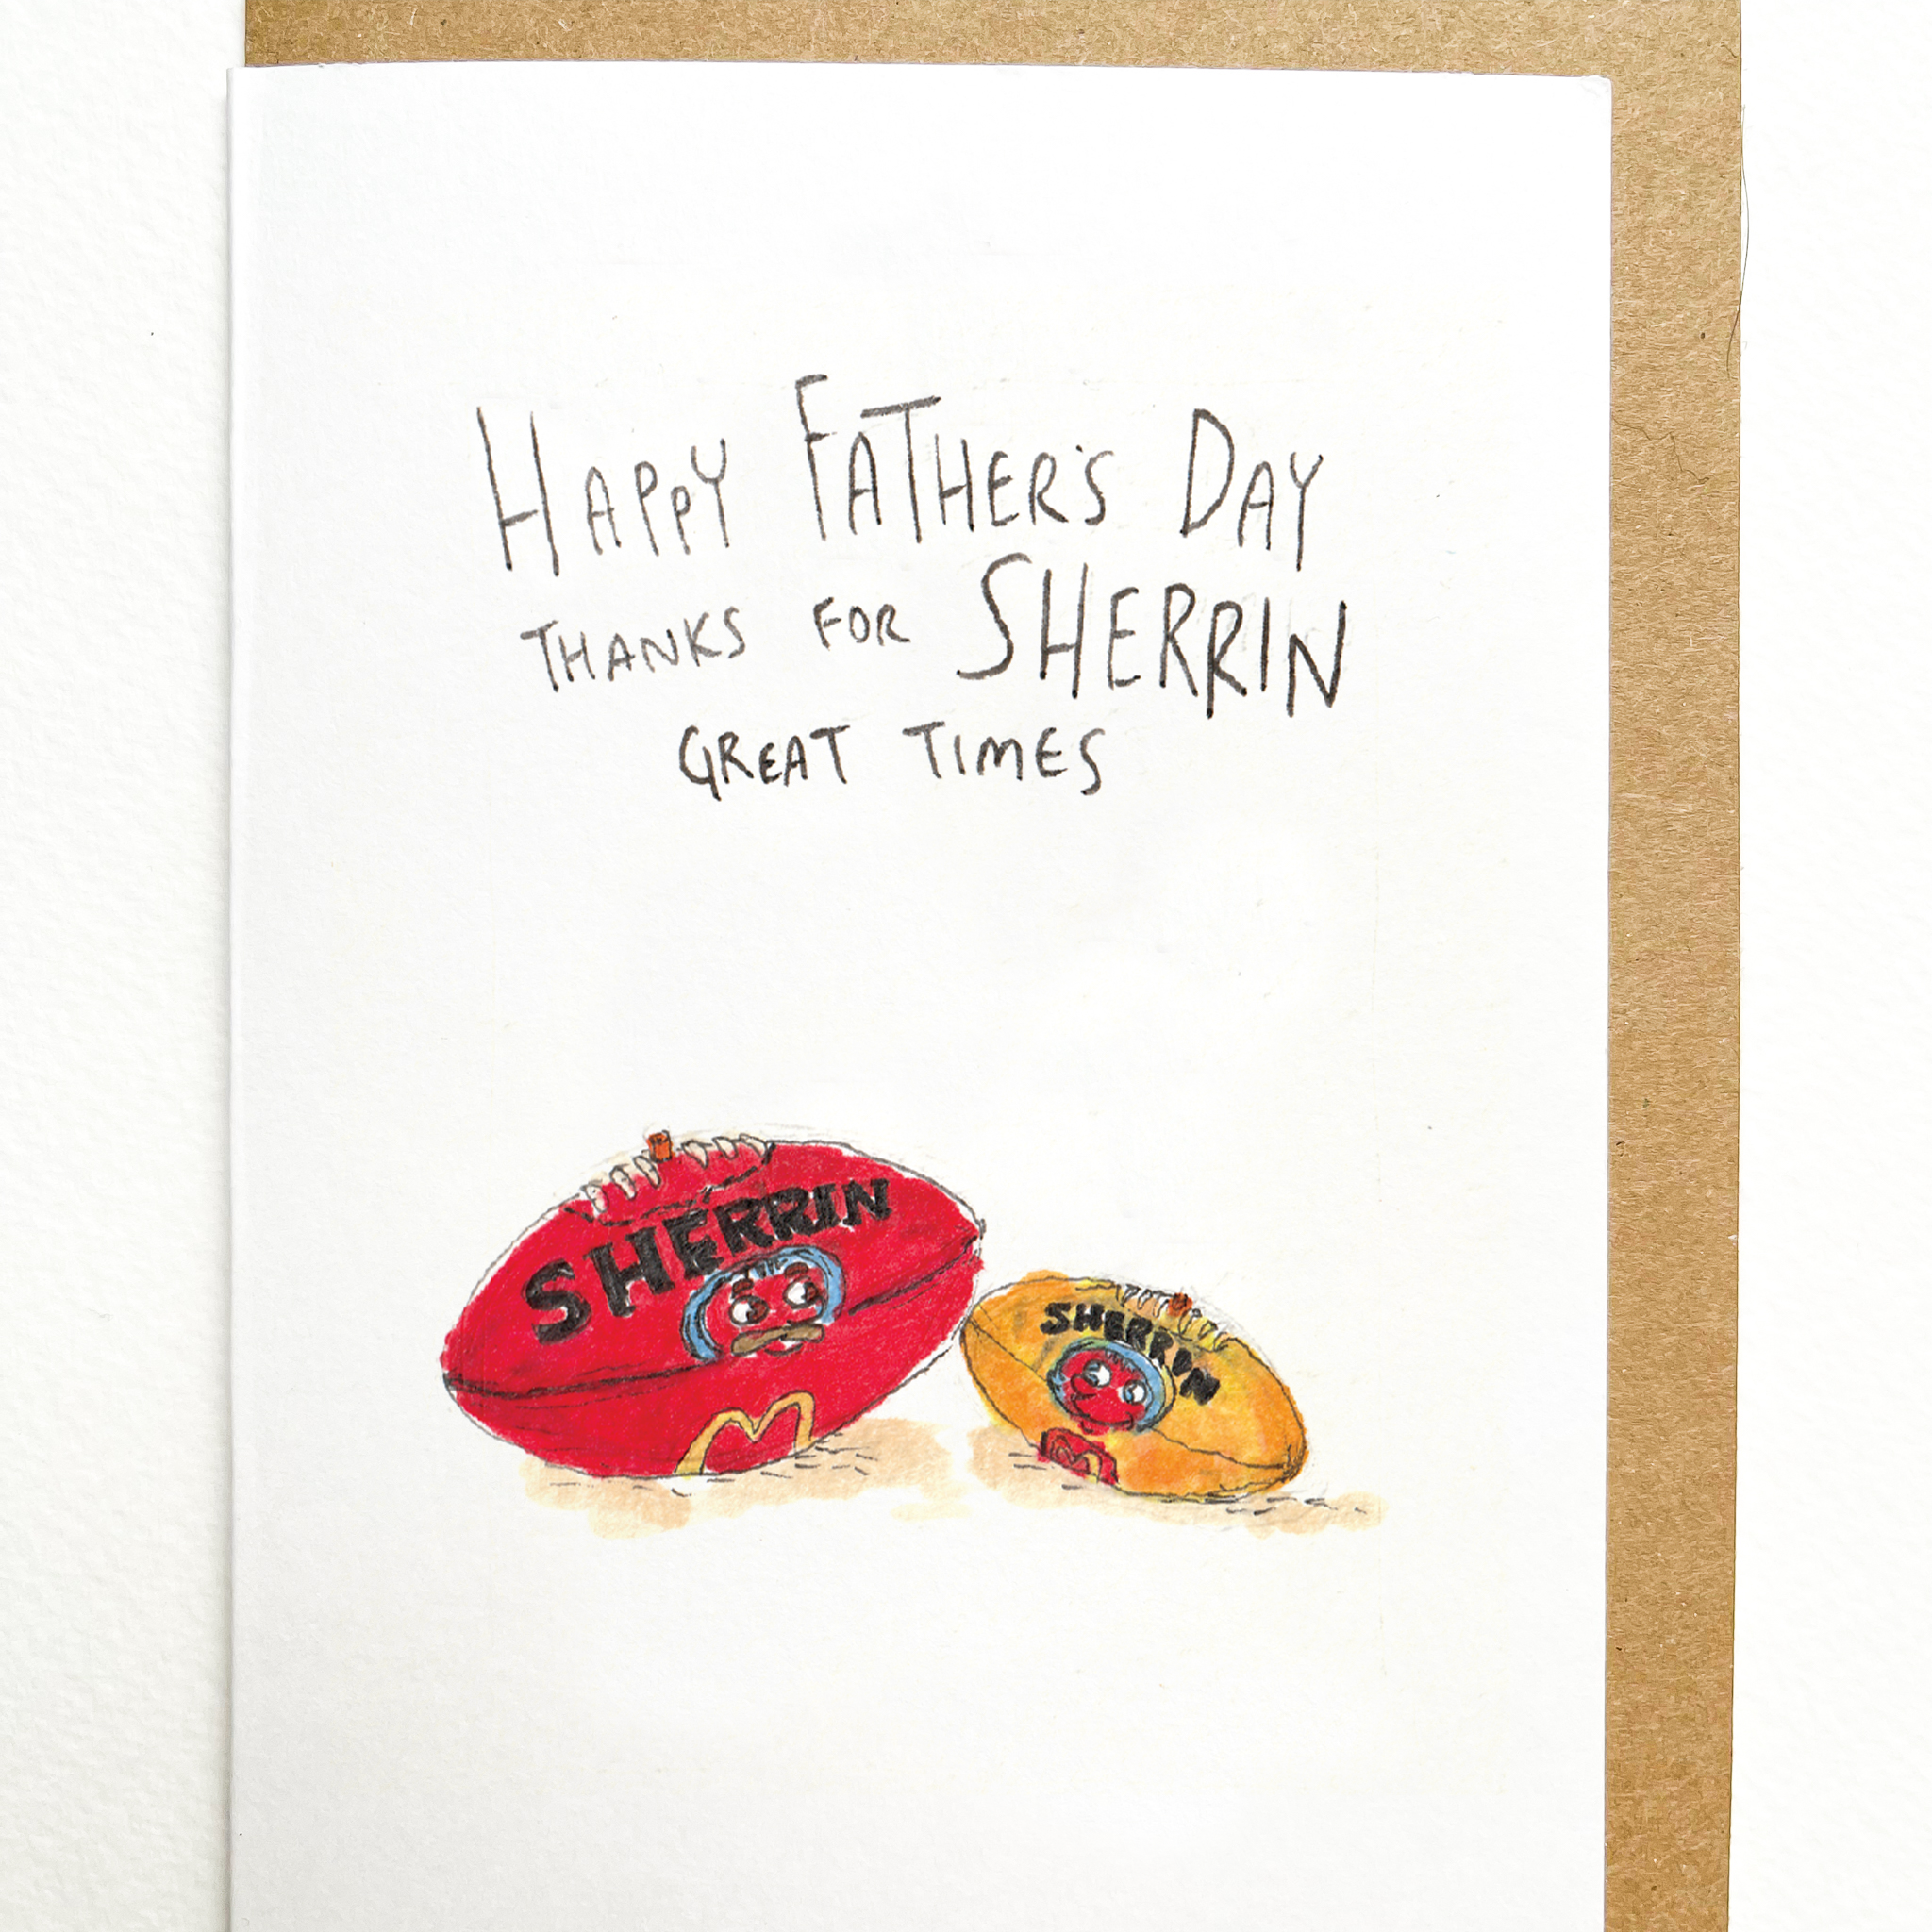 Happy Father's Day, Thanks for Sherrin great times